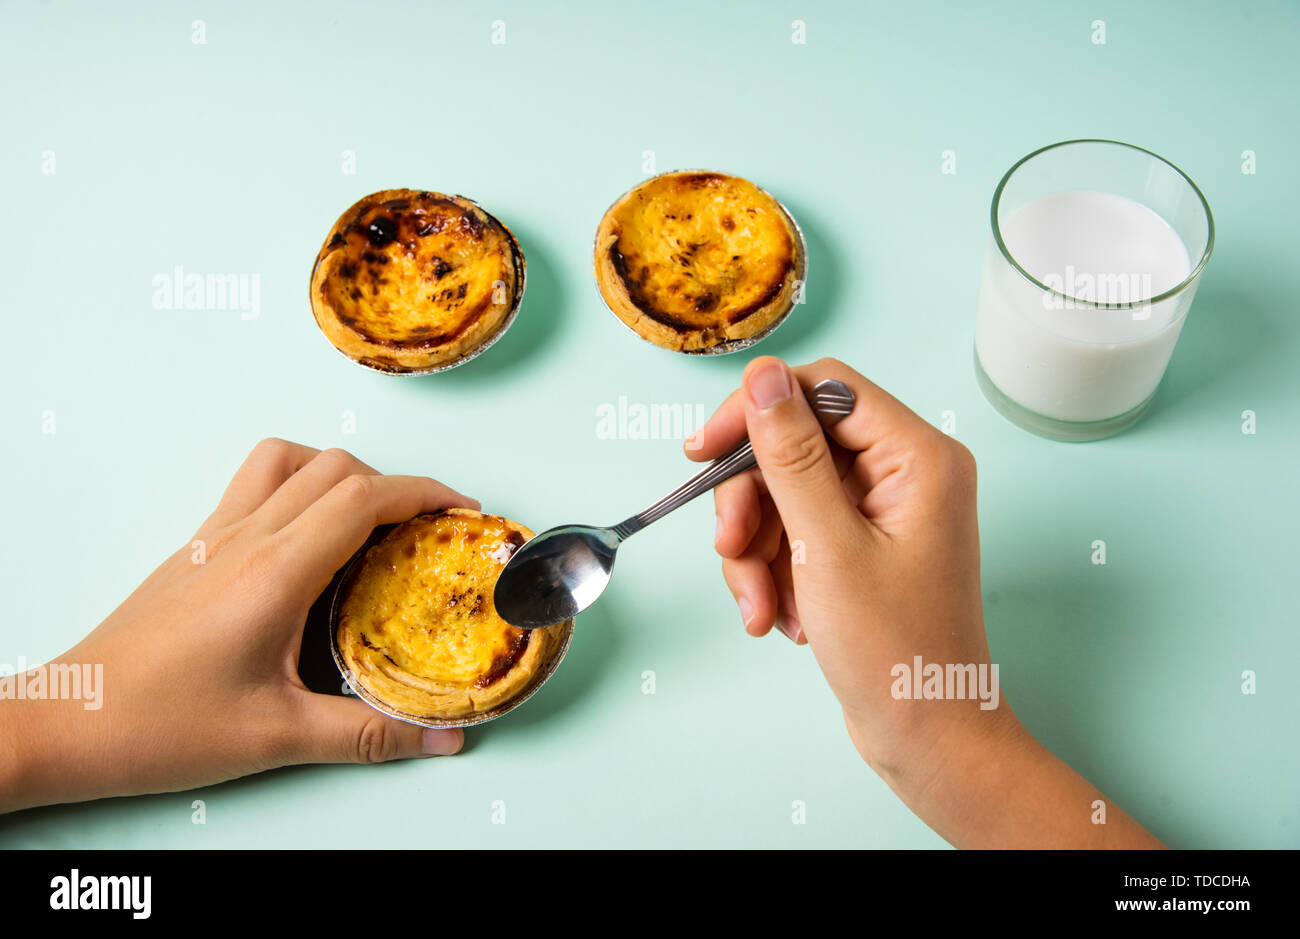 Female eating egg tart dessert with a spoon top view Stock Photo